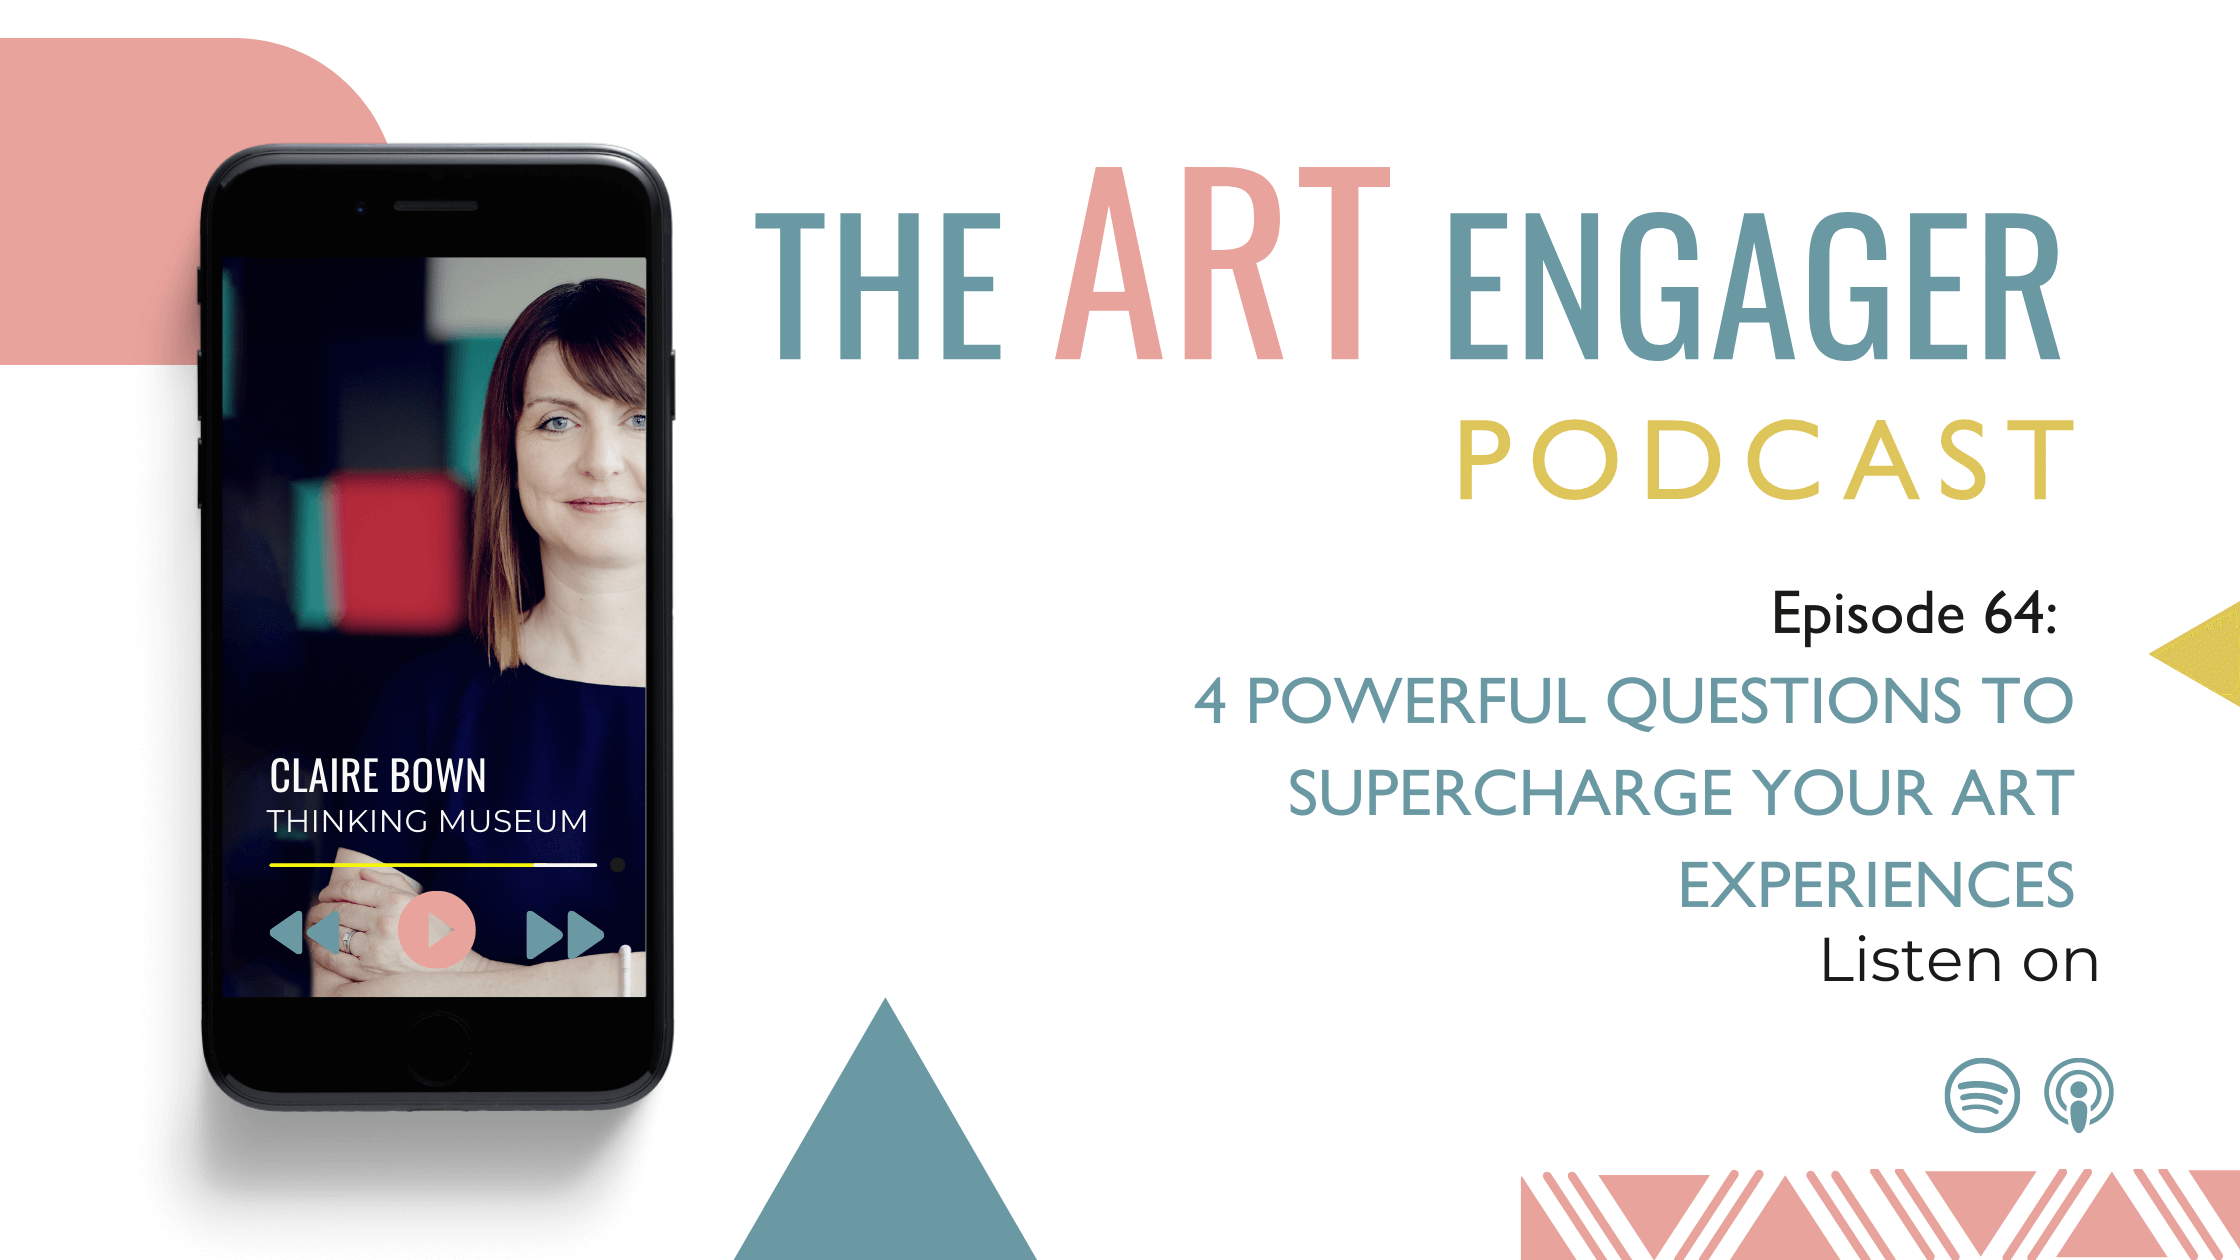 4 Powerful Questions to Supercharge your Art Experiences